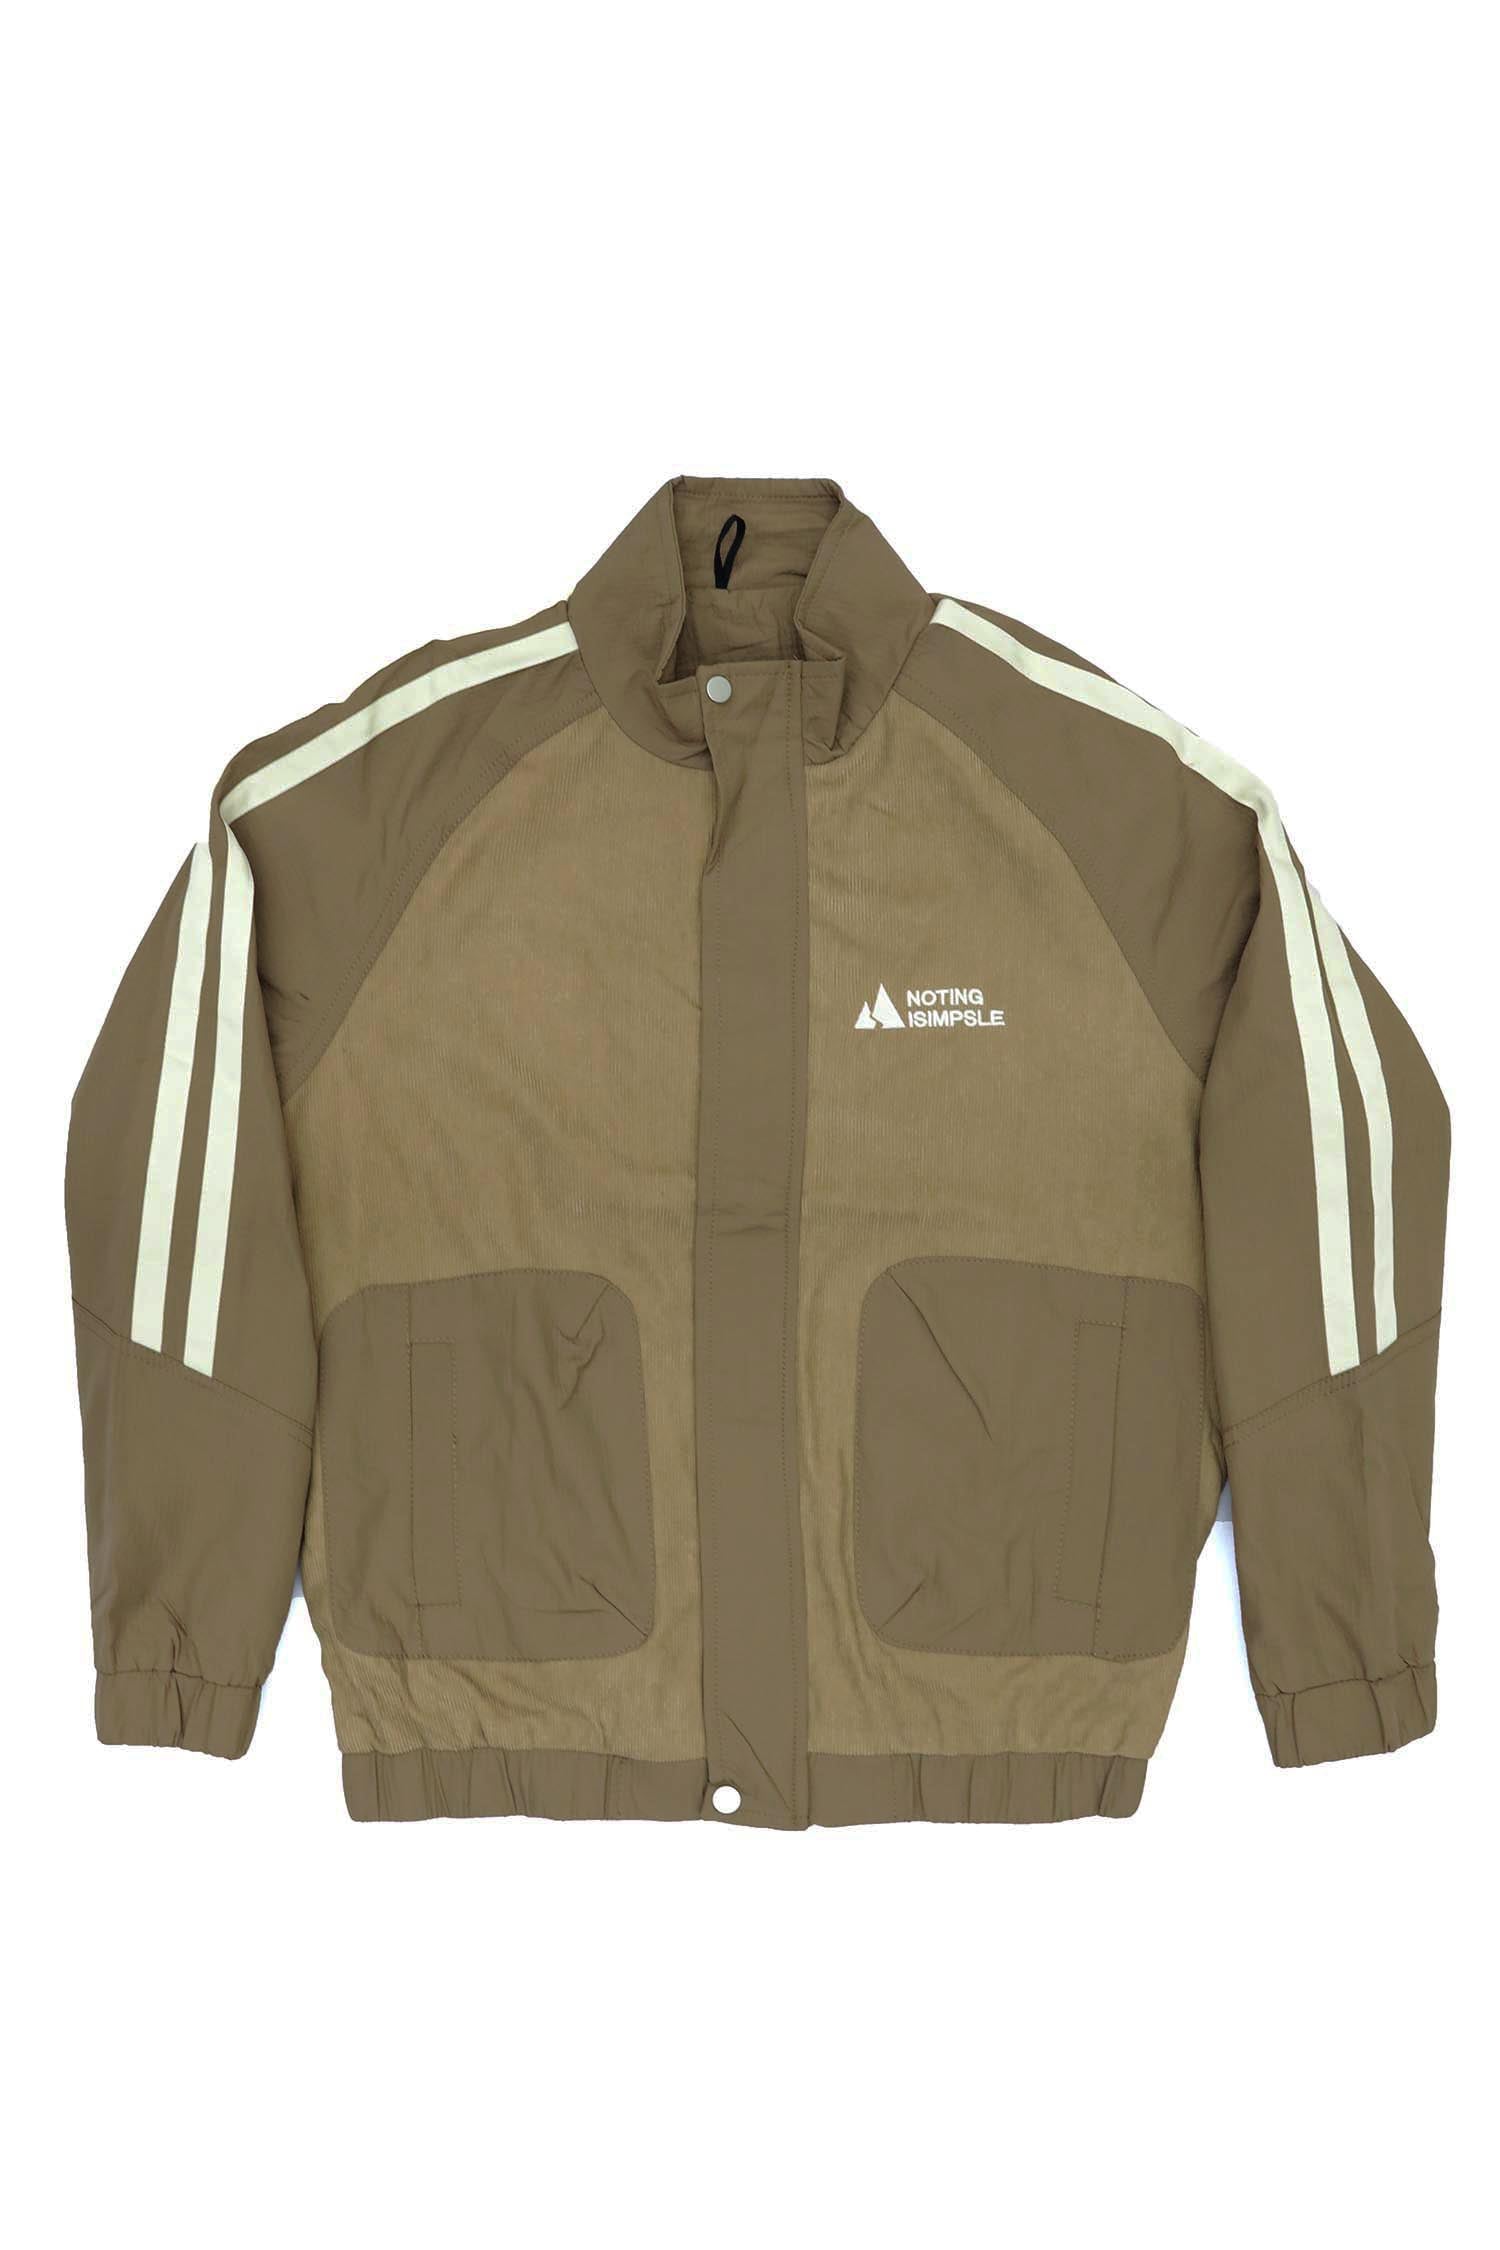 Notng Ismple Front Slogan Light Weight Jacket